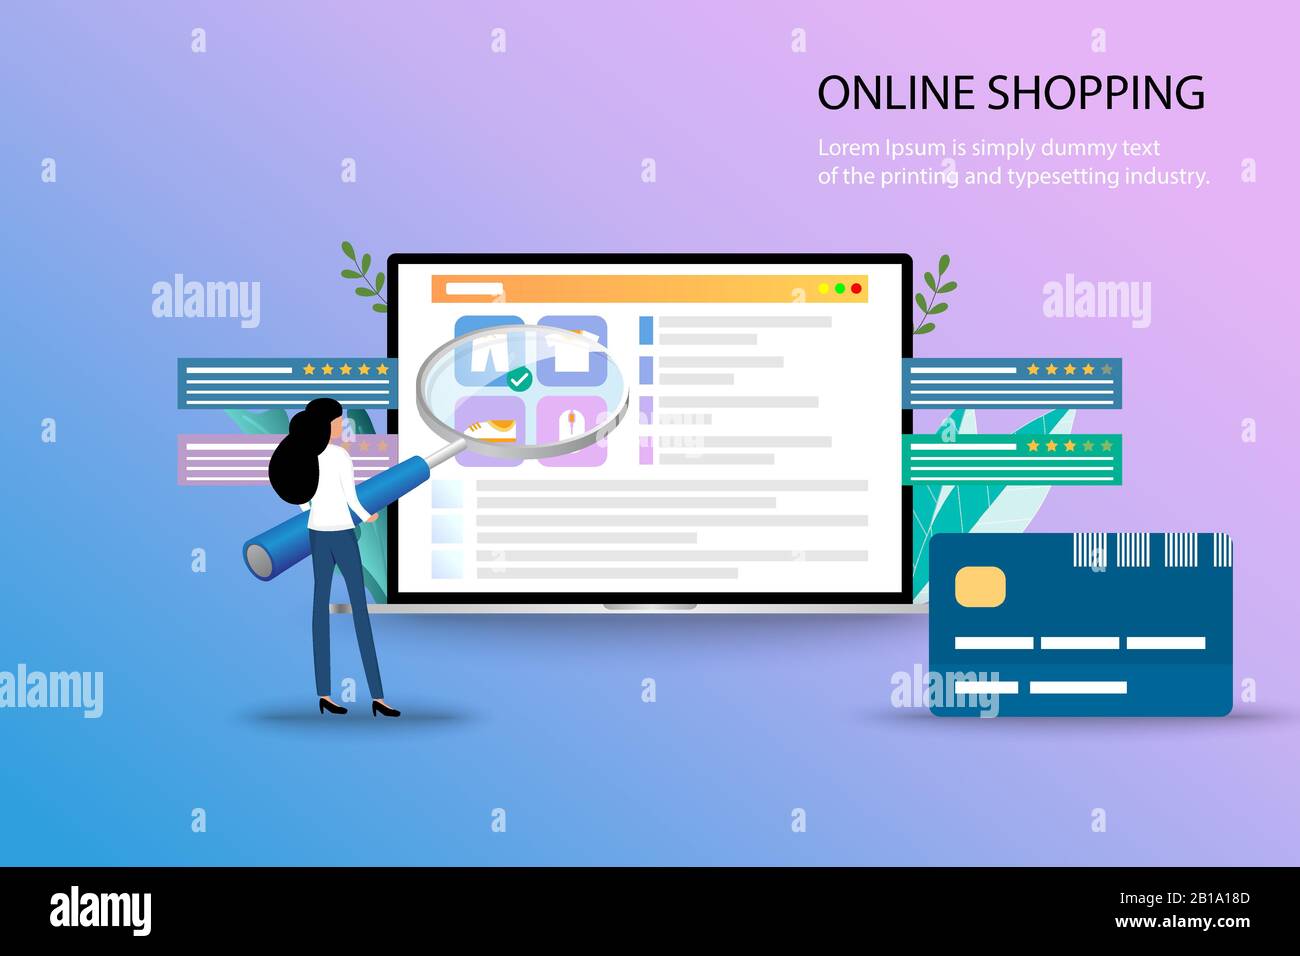 Concept of online shopping, businesswoman hold a magnifier and focus on the display of laptop that show list of products, description, customer rating Stock Vector